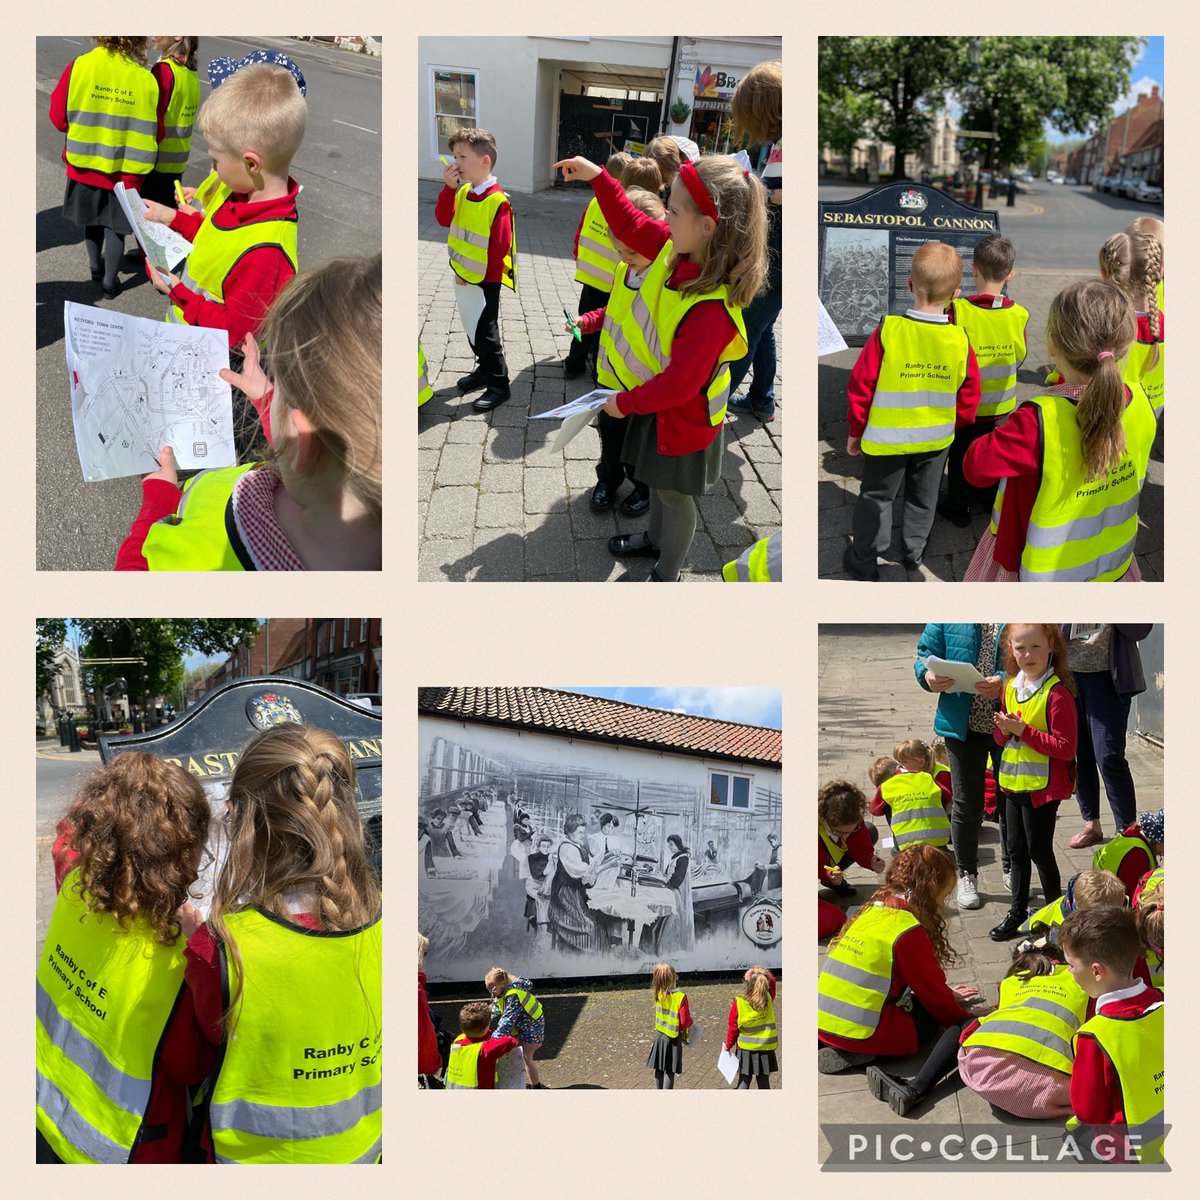 Class 1 have enjoyed a super day at @BassetlawMuseum making our own map showing the history of Retford, exploring the museum and using maps to see what changed in the town.